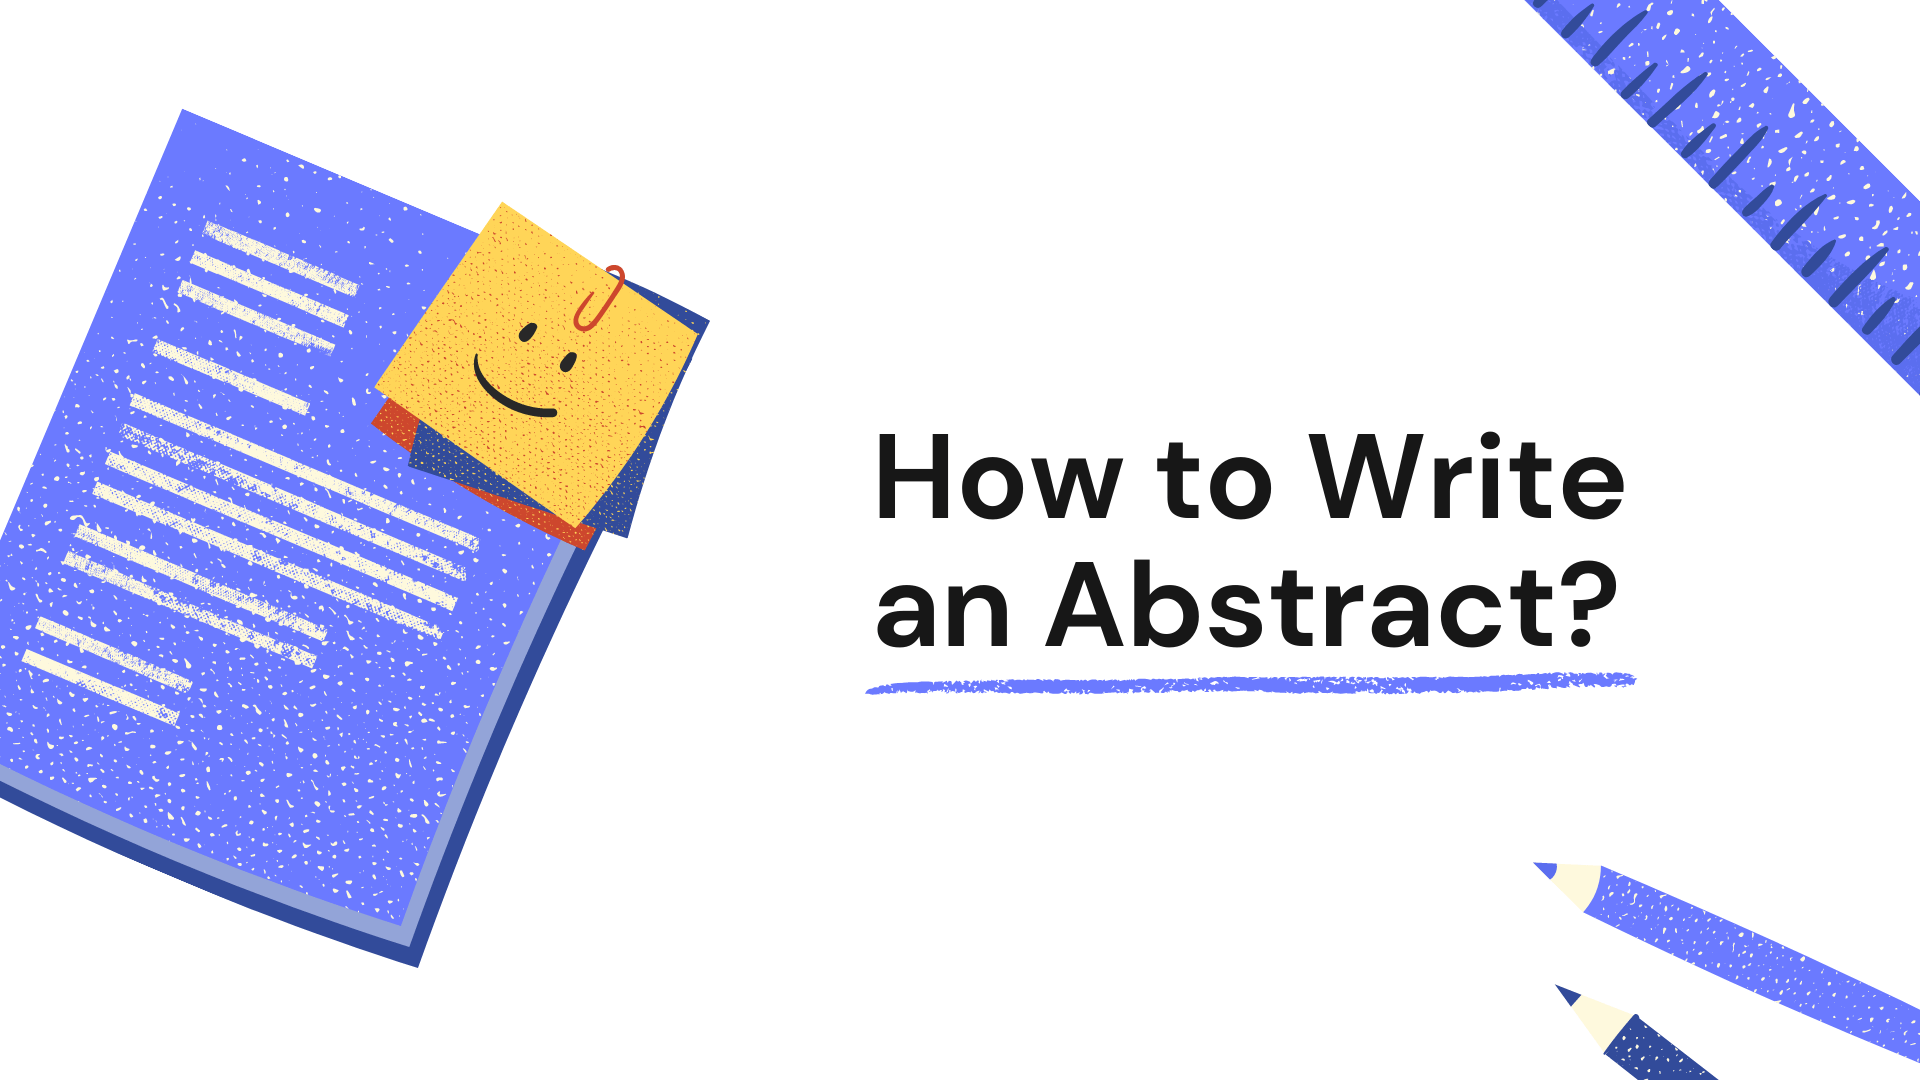 How to Write an Abstract for an Assignment